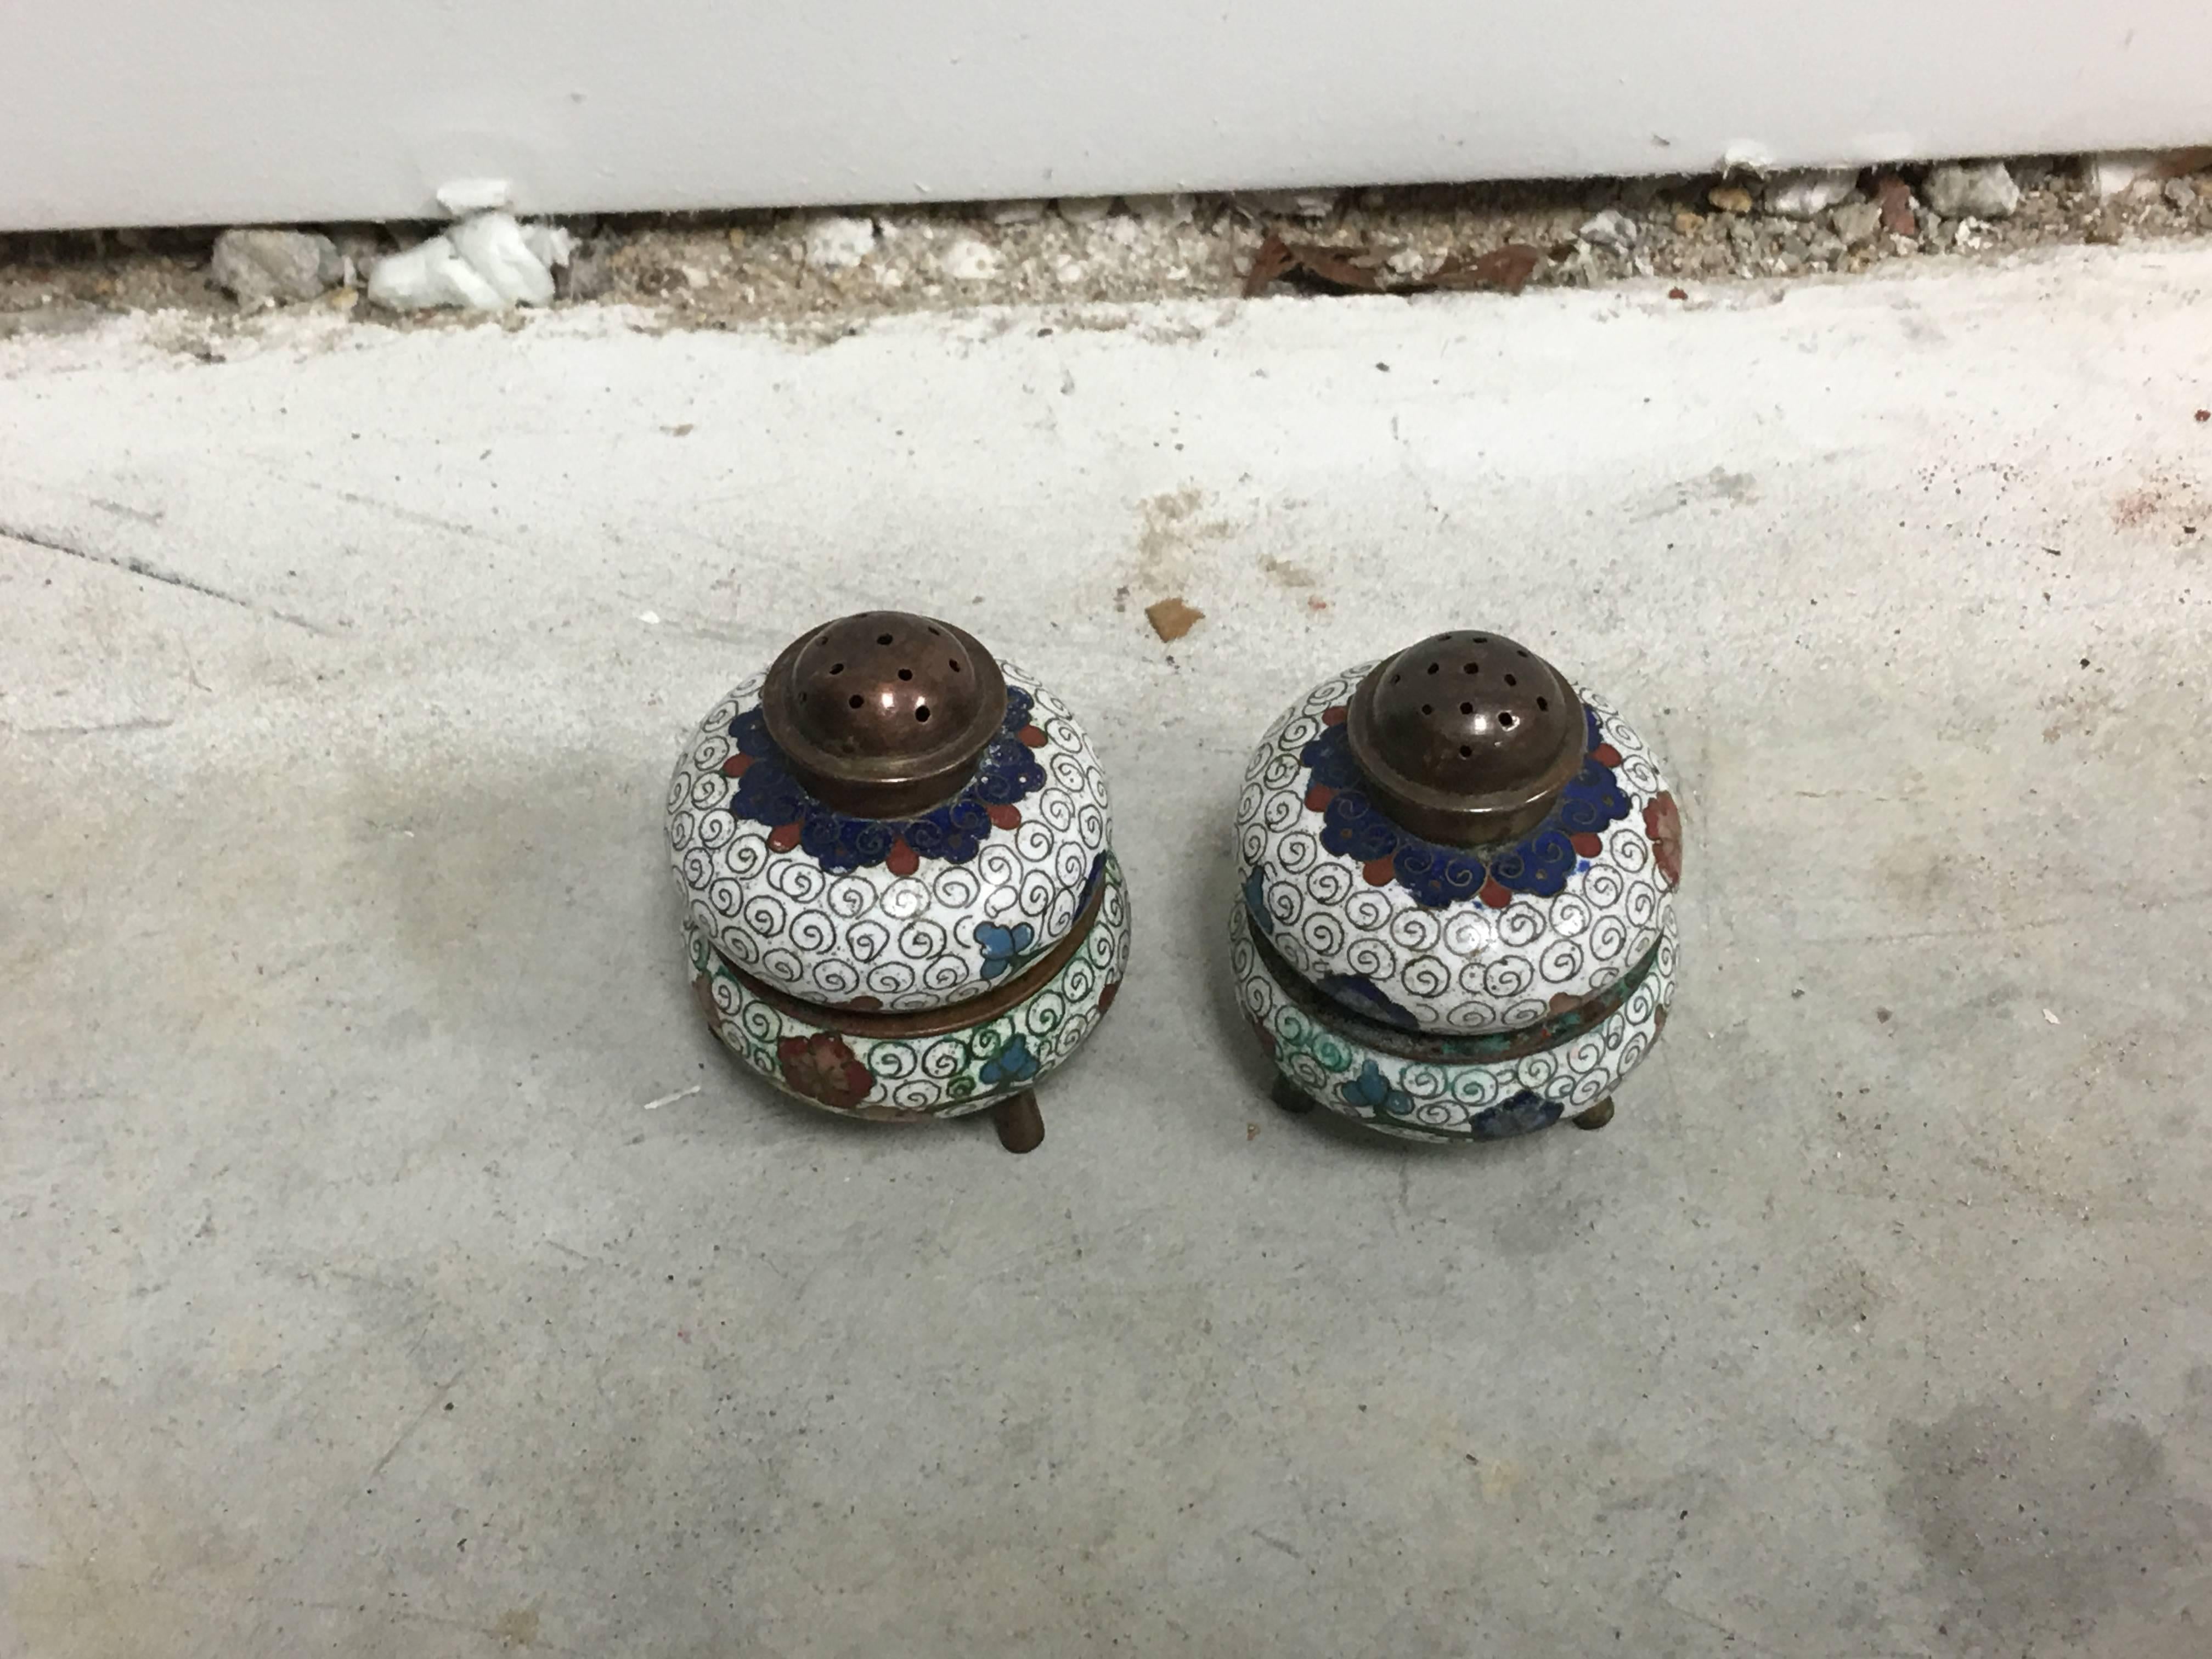 Chinoiserie 1930s Cloisonné Salt and Pepper Shakers with Stands